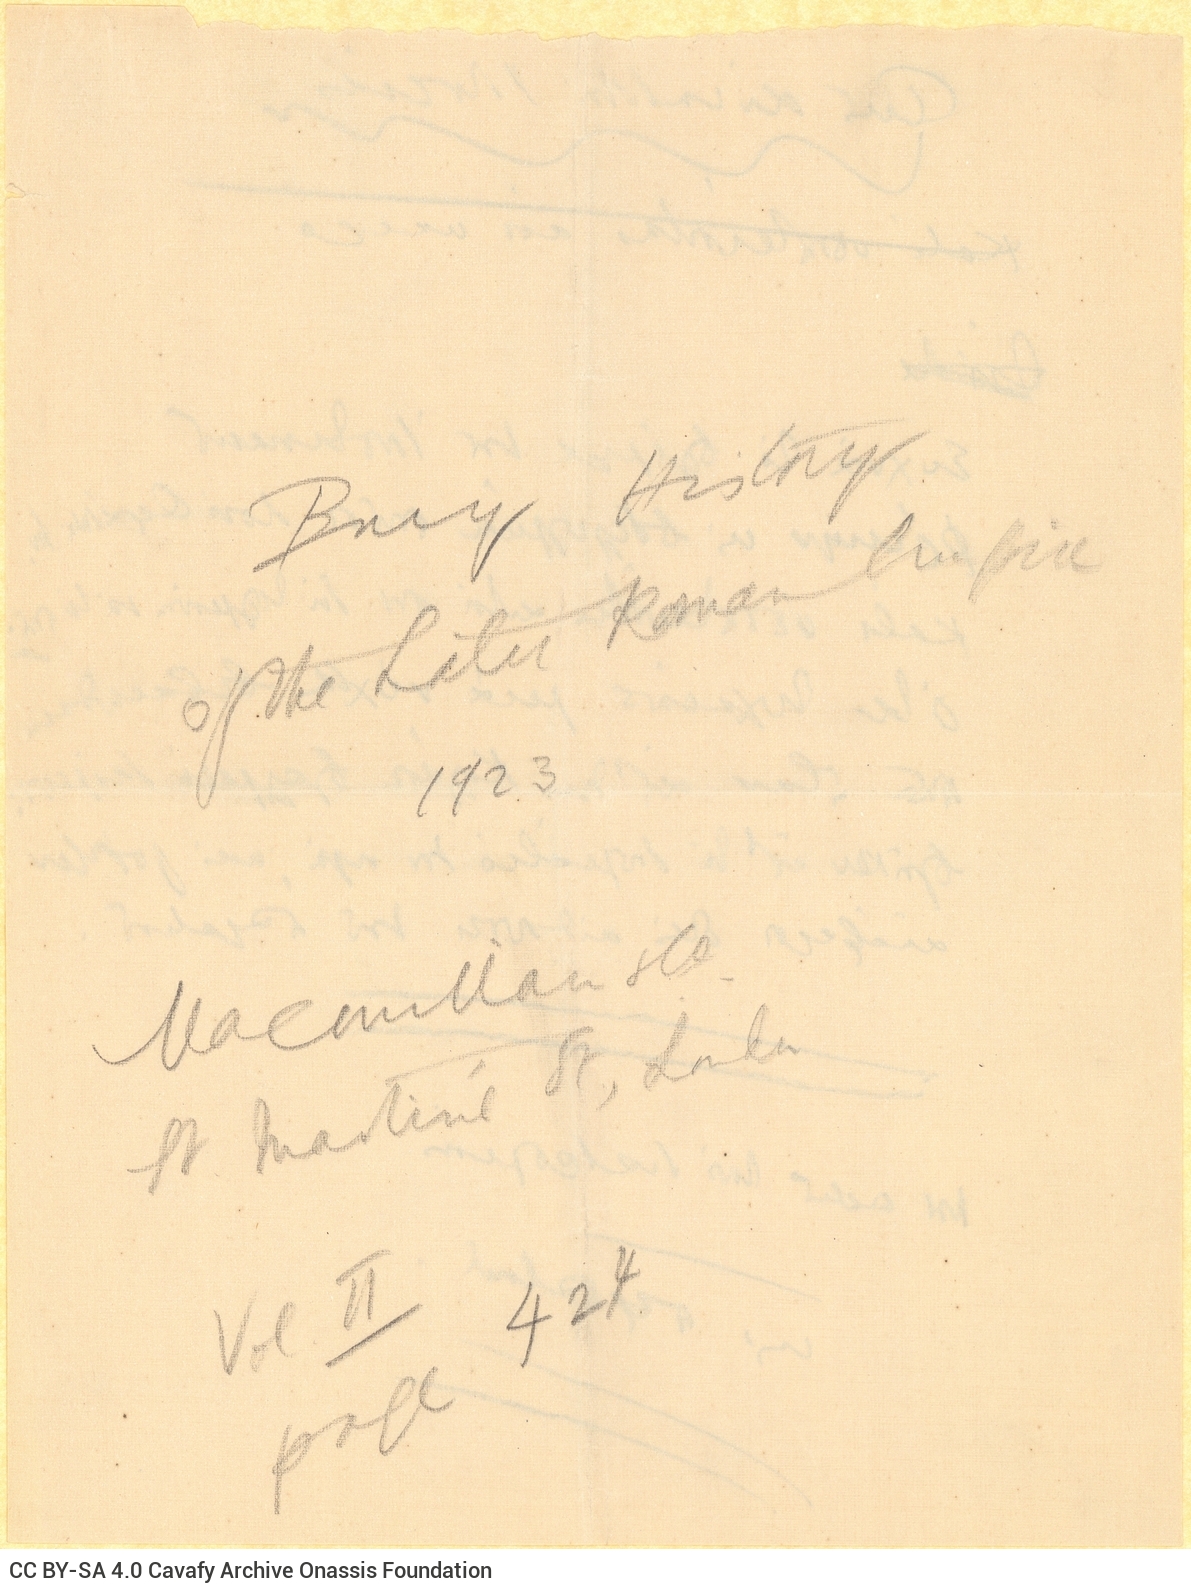 Handwritten draft of the poem "From the Unpublished History" on the recto of a sheet. On the verso, note with a reference 